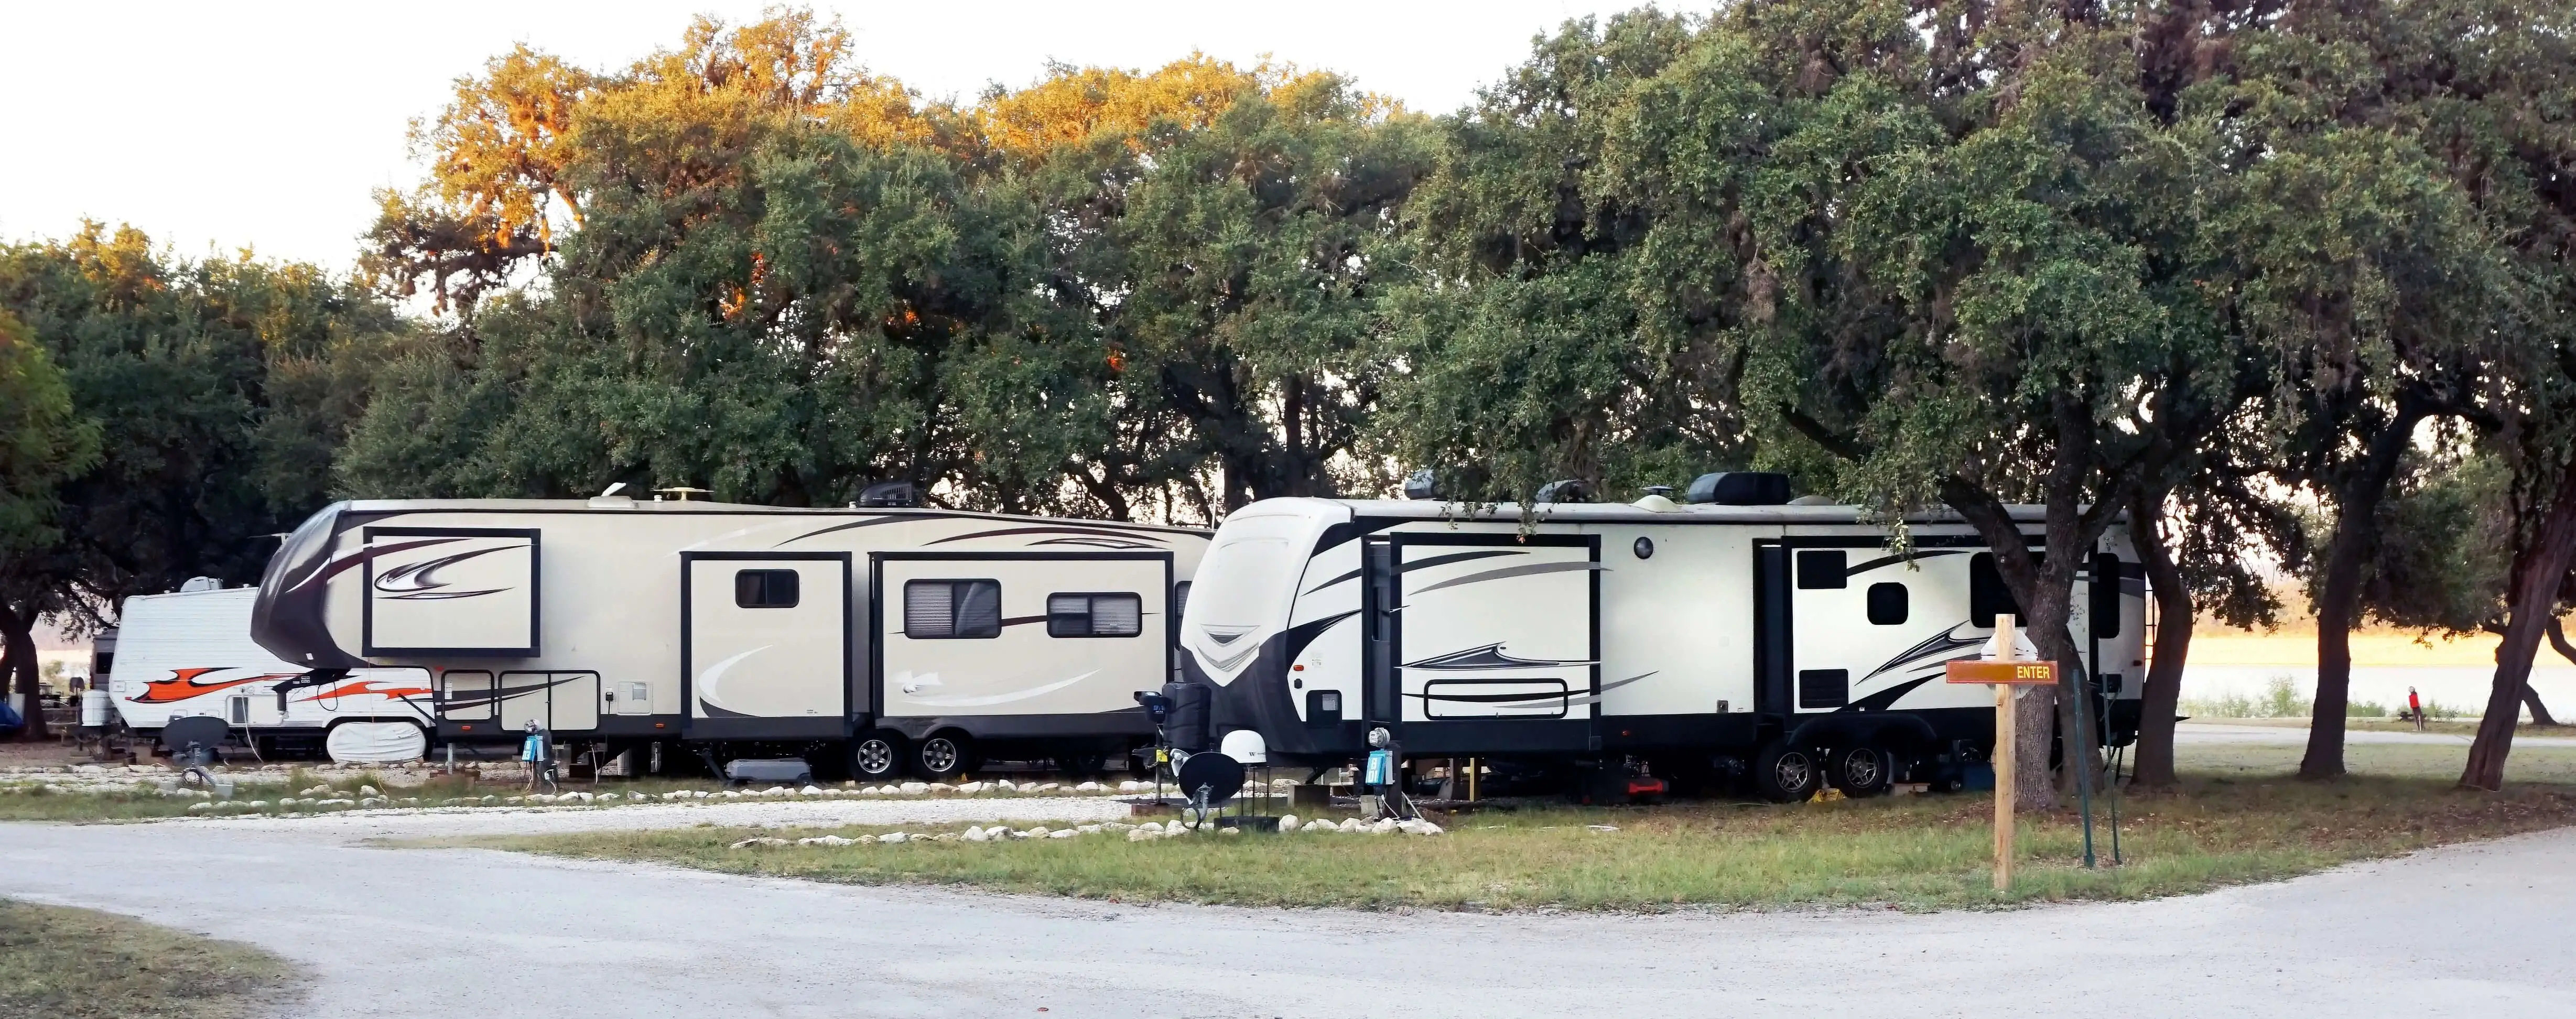 RV's parked in a camp